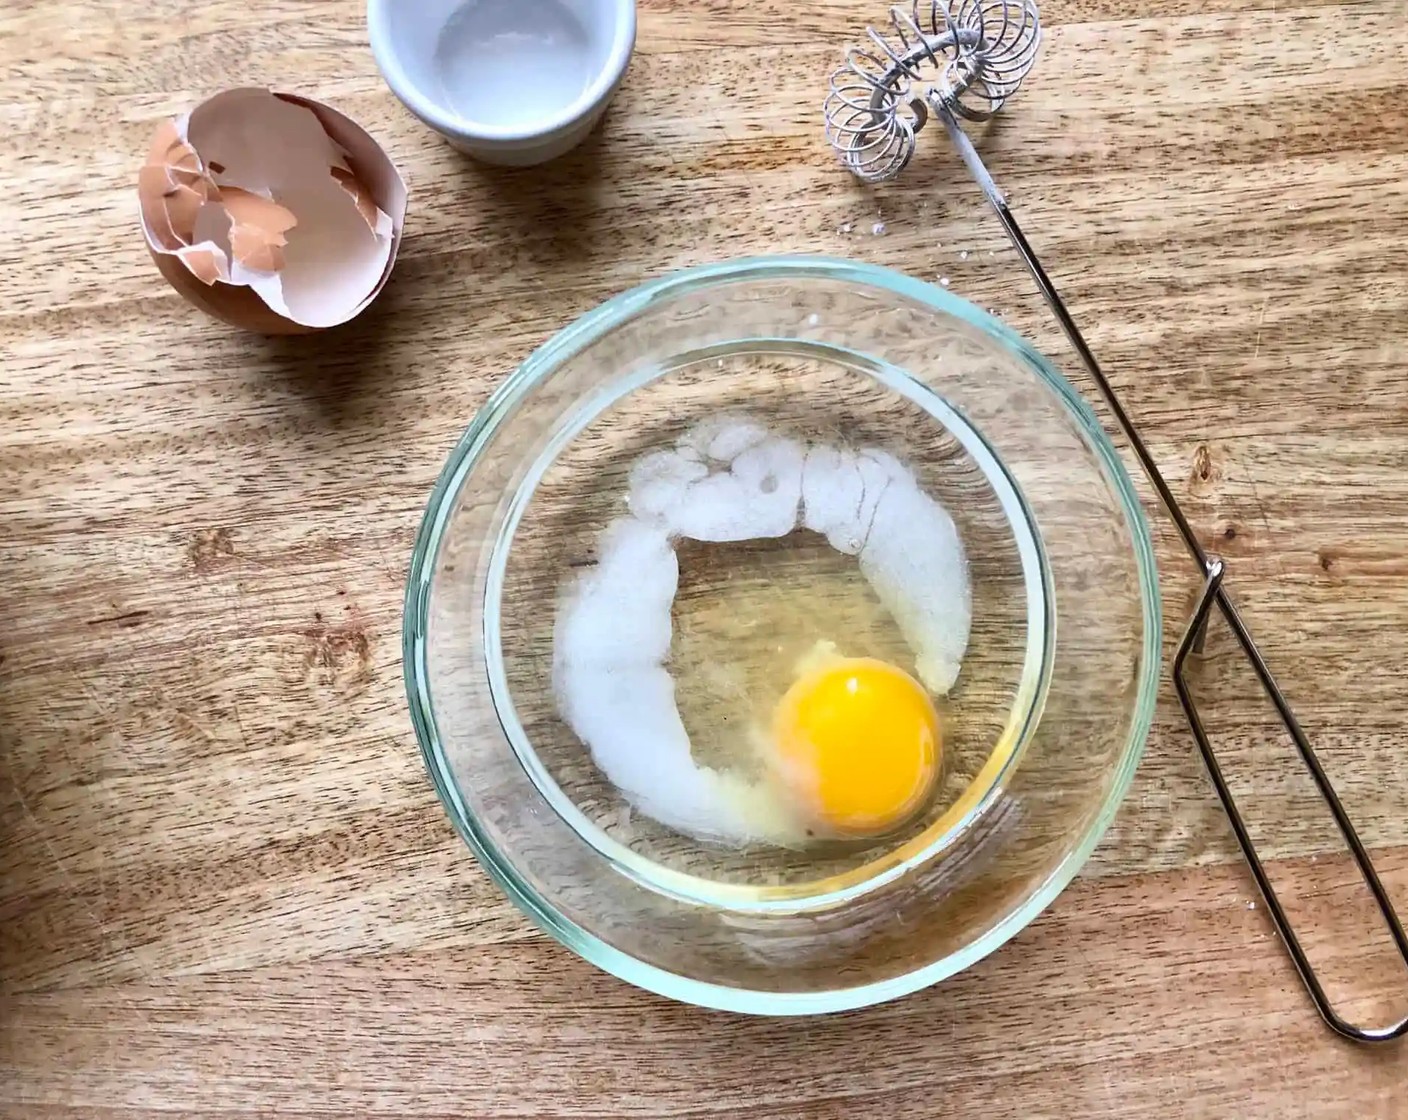 step 2 In a separate bowl, whisk together the Farmhouse Eggs® Large Brown Egg (1), Salt (3/4 tsp), and Water (1/2 cup).